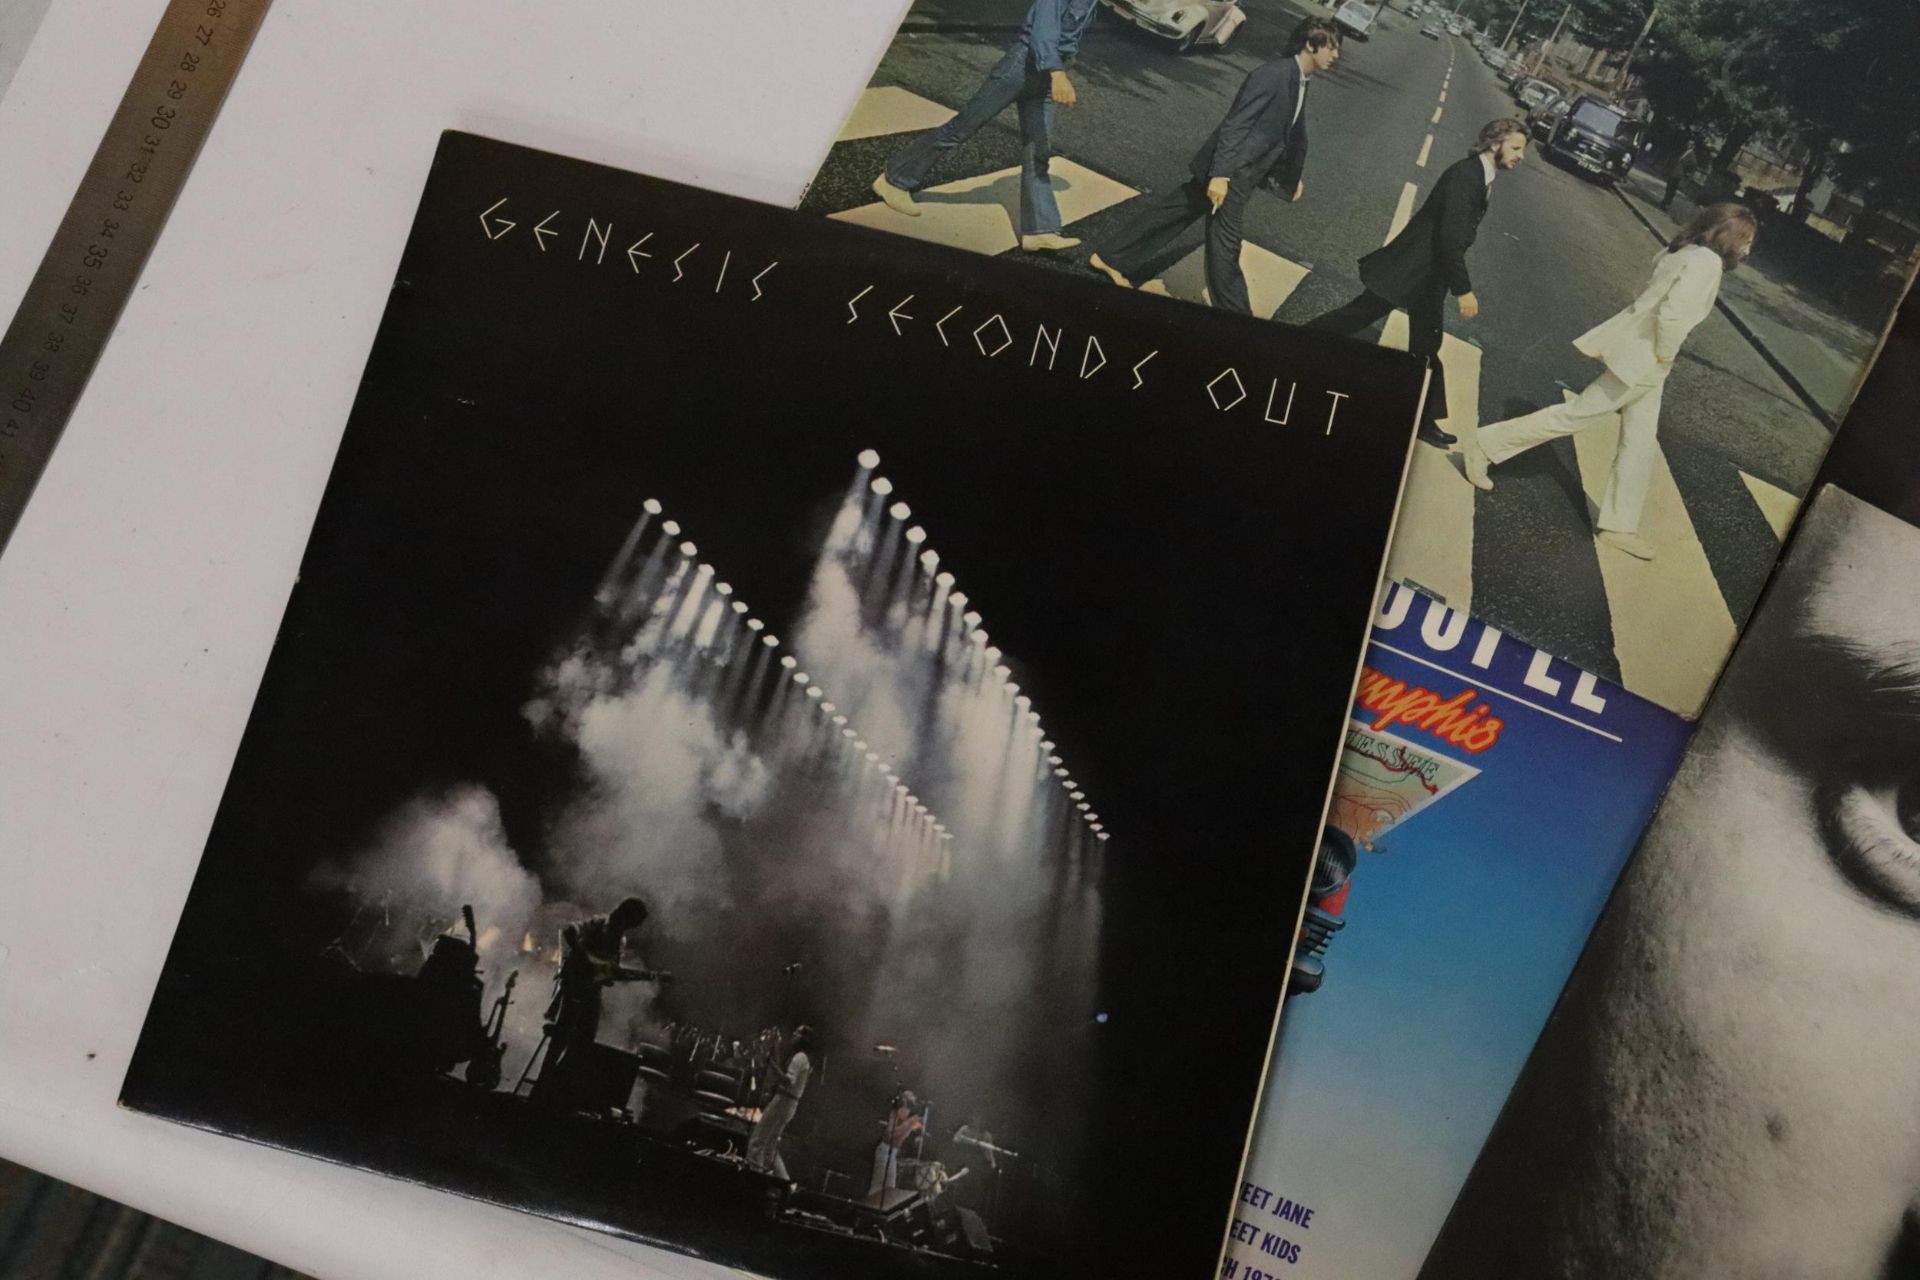 A COLLECTION OF VINYL LP RECORDS TO INCLUDE GENESIS, FOXTROT, THE BEATLES, ABBEY ROAD, BOB DYLAN, - Image 2 of 5